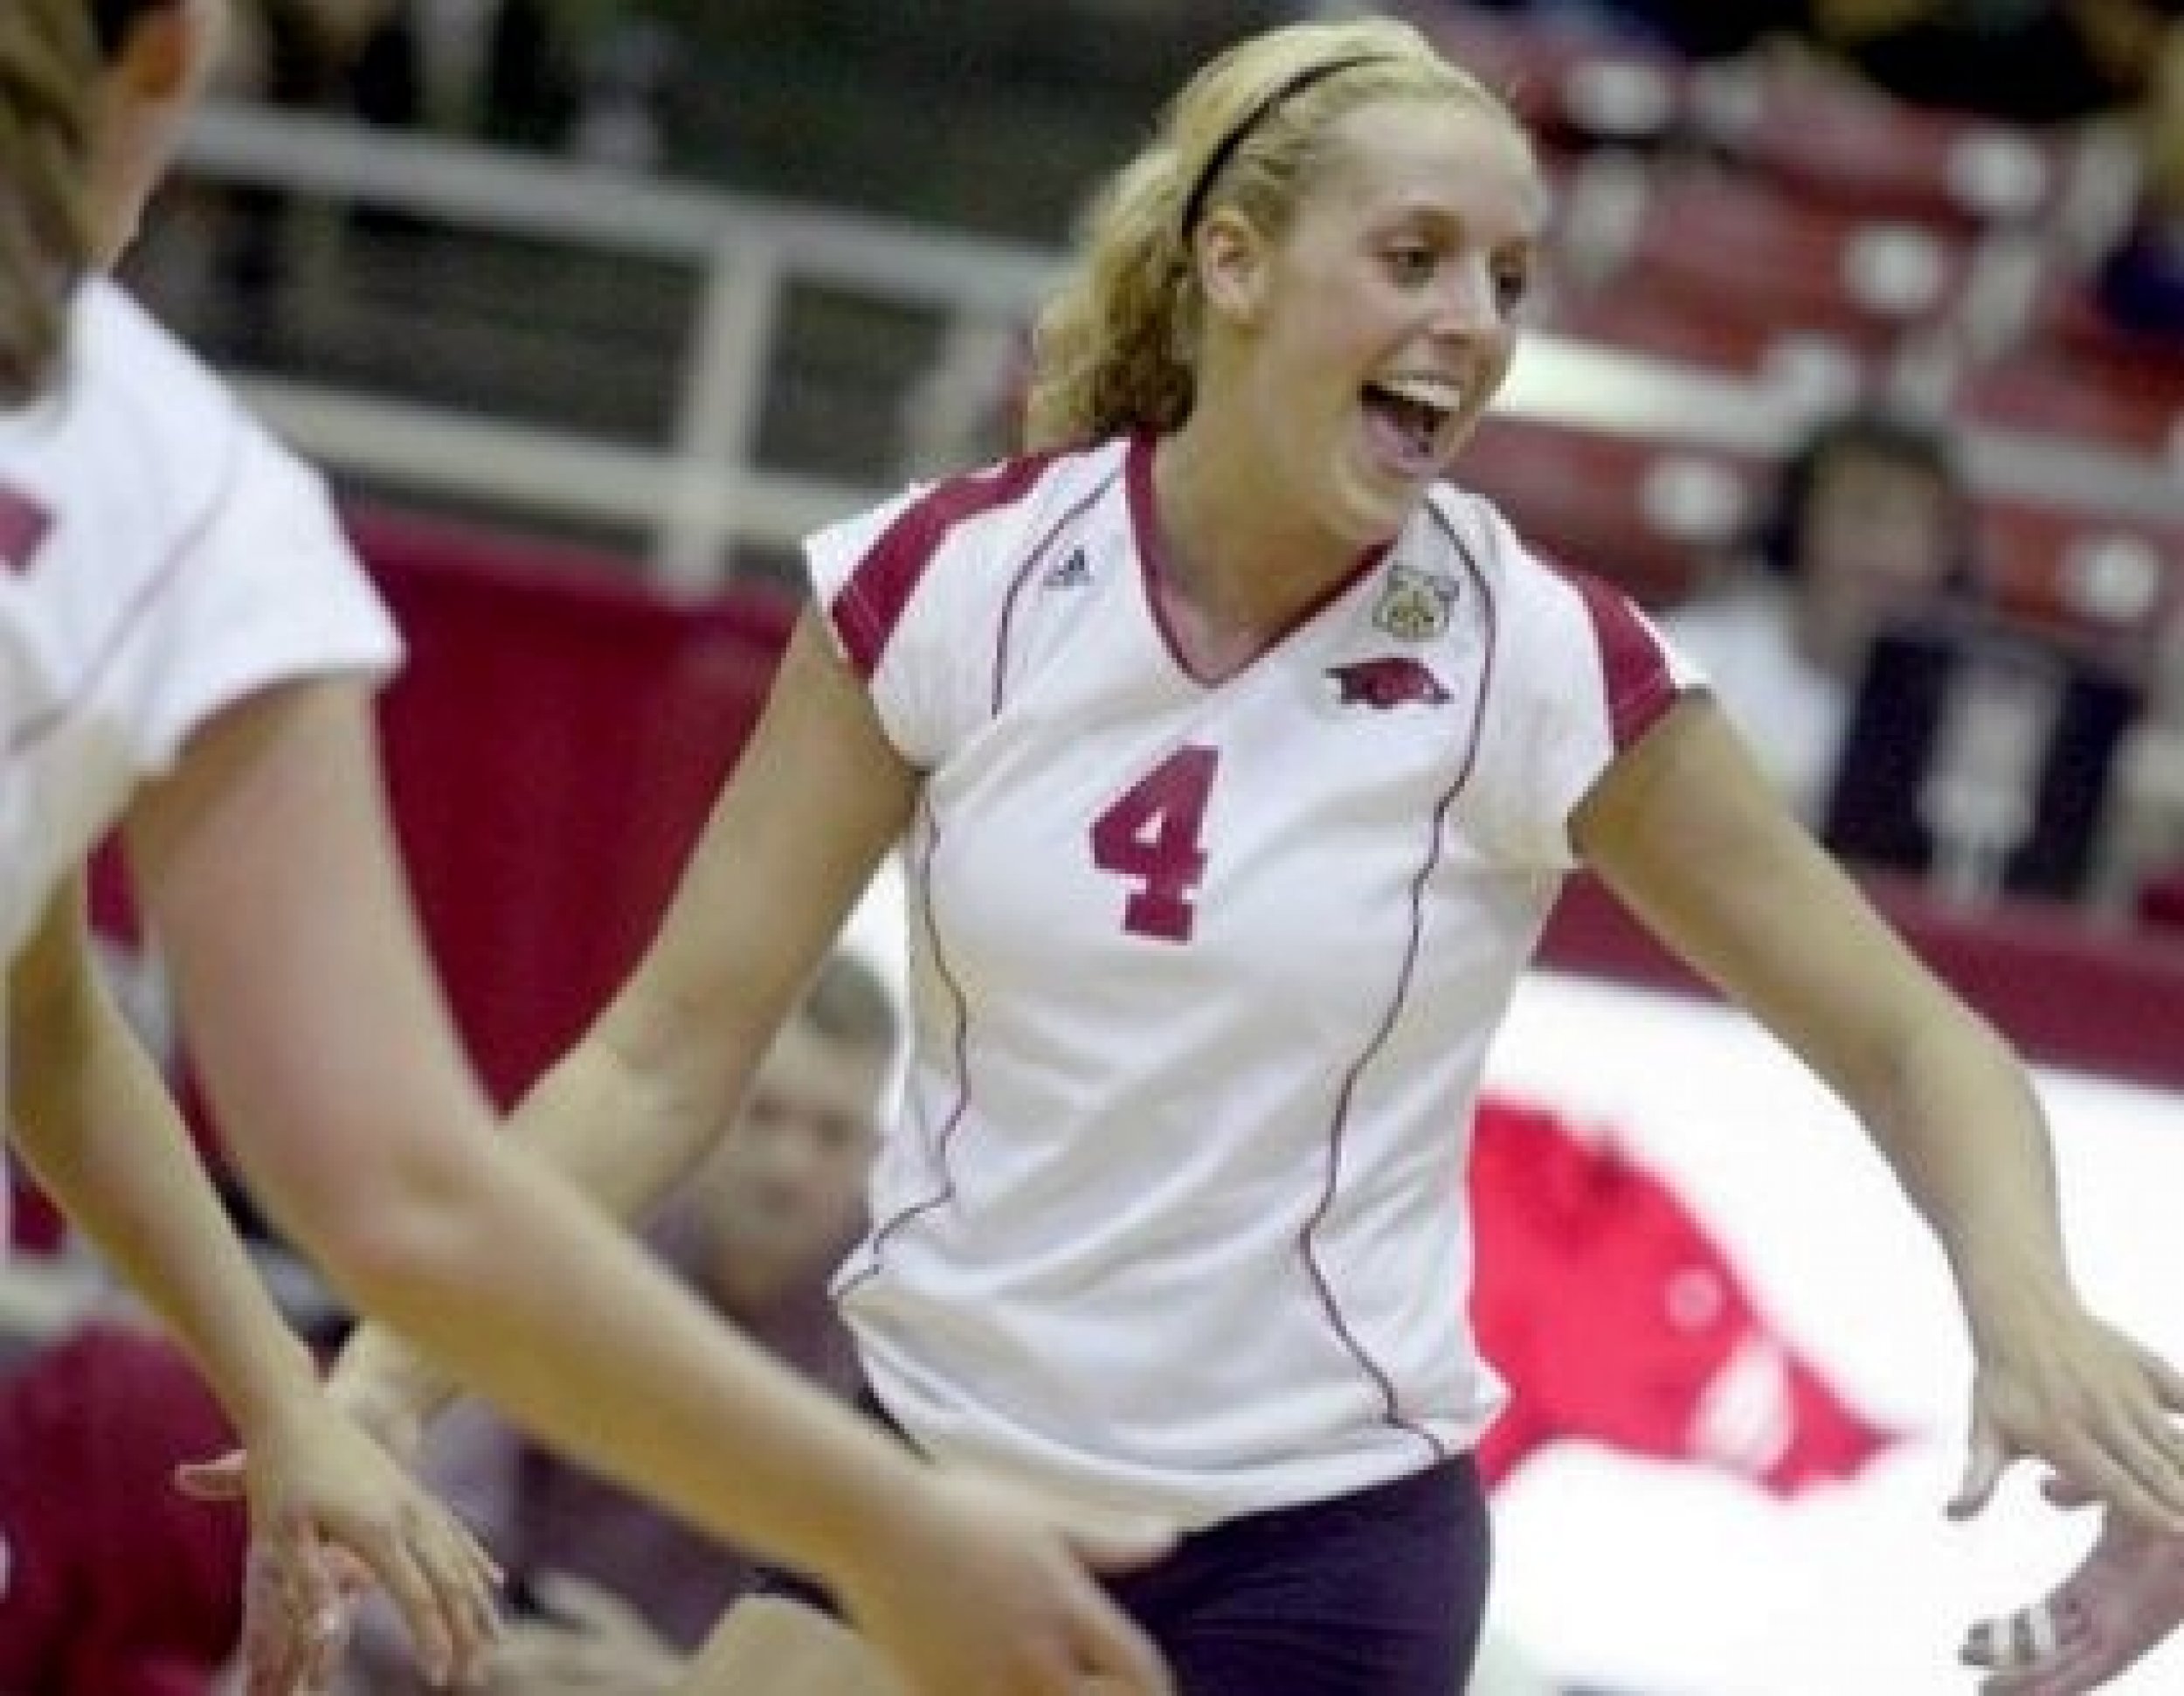 Dorrell was an All-SEC selection in volleyball when she was a senior at Arkansas.